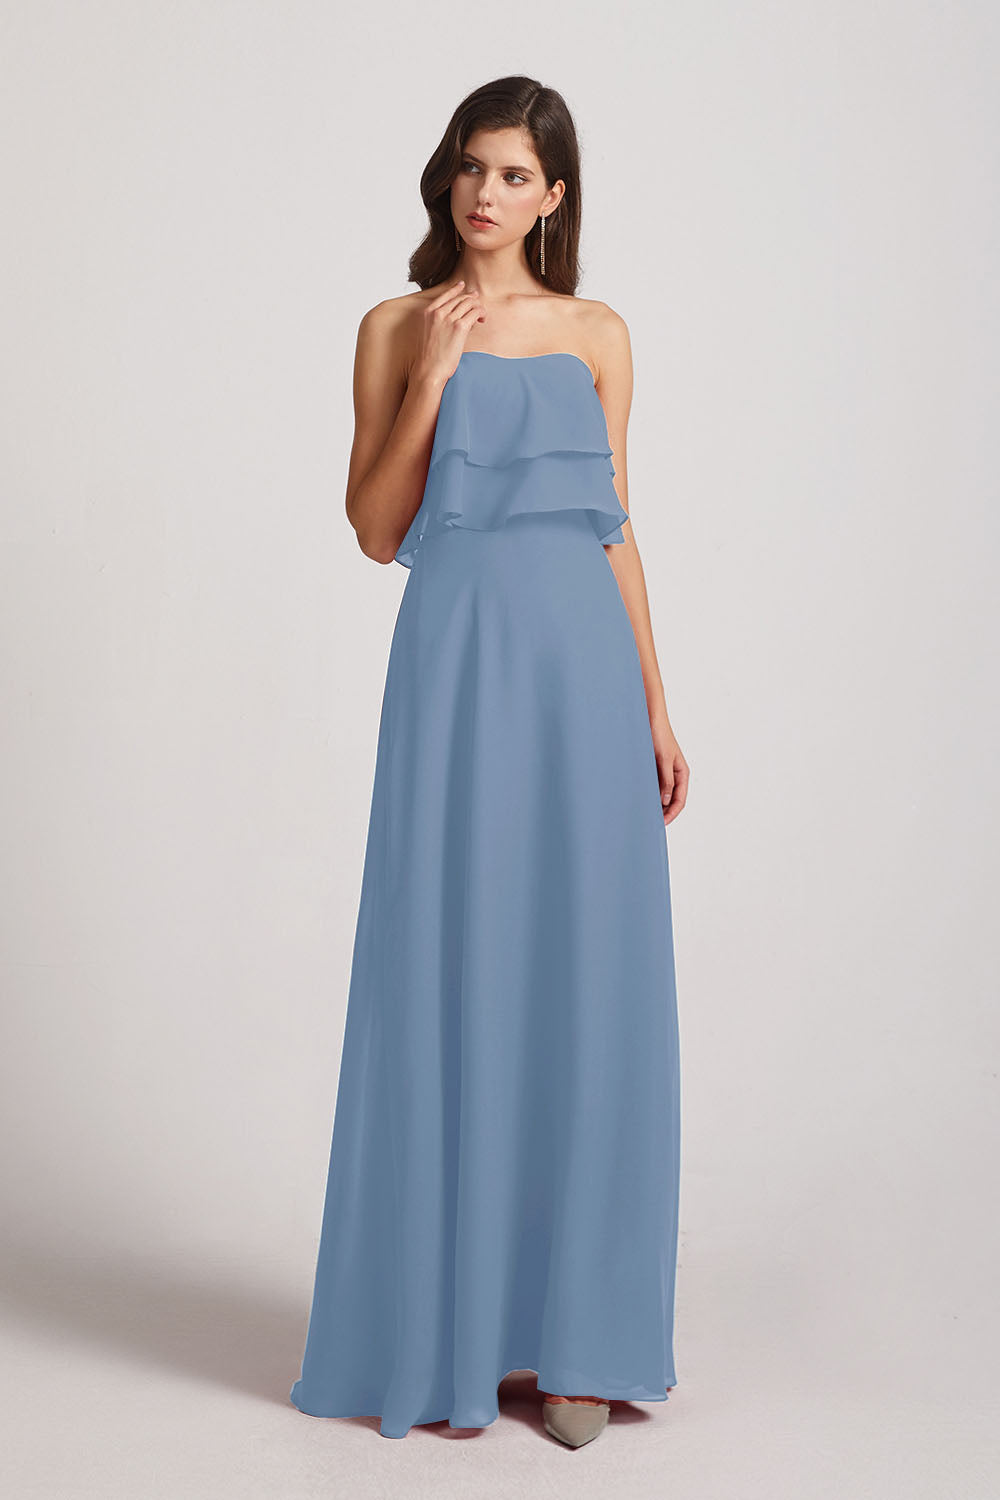 Alfa Bridal Dusty Blue Strapless Chiffon Bridesmaid Dresses with Tiered Ruffles (AF0086)